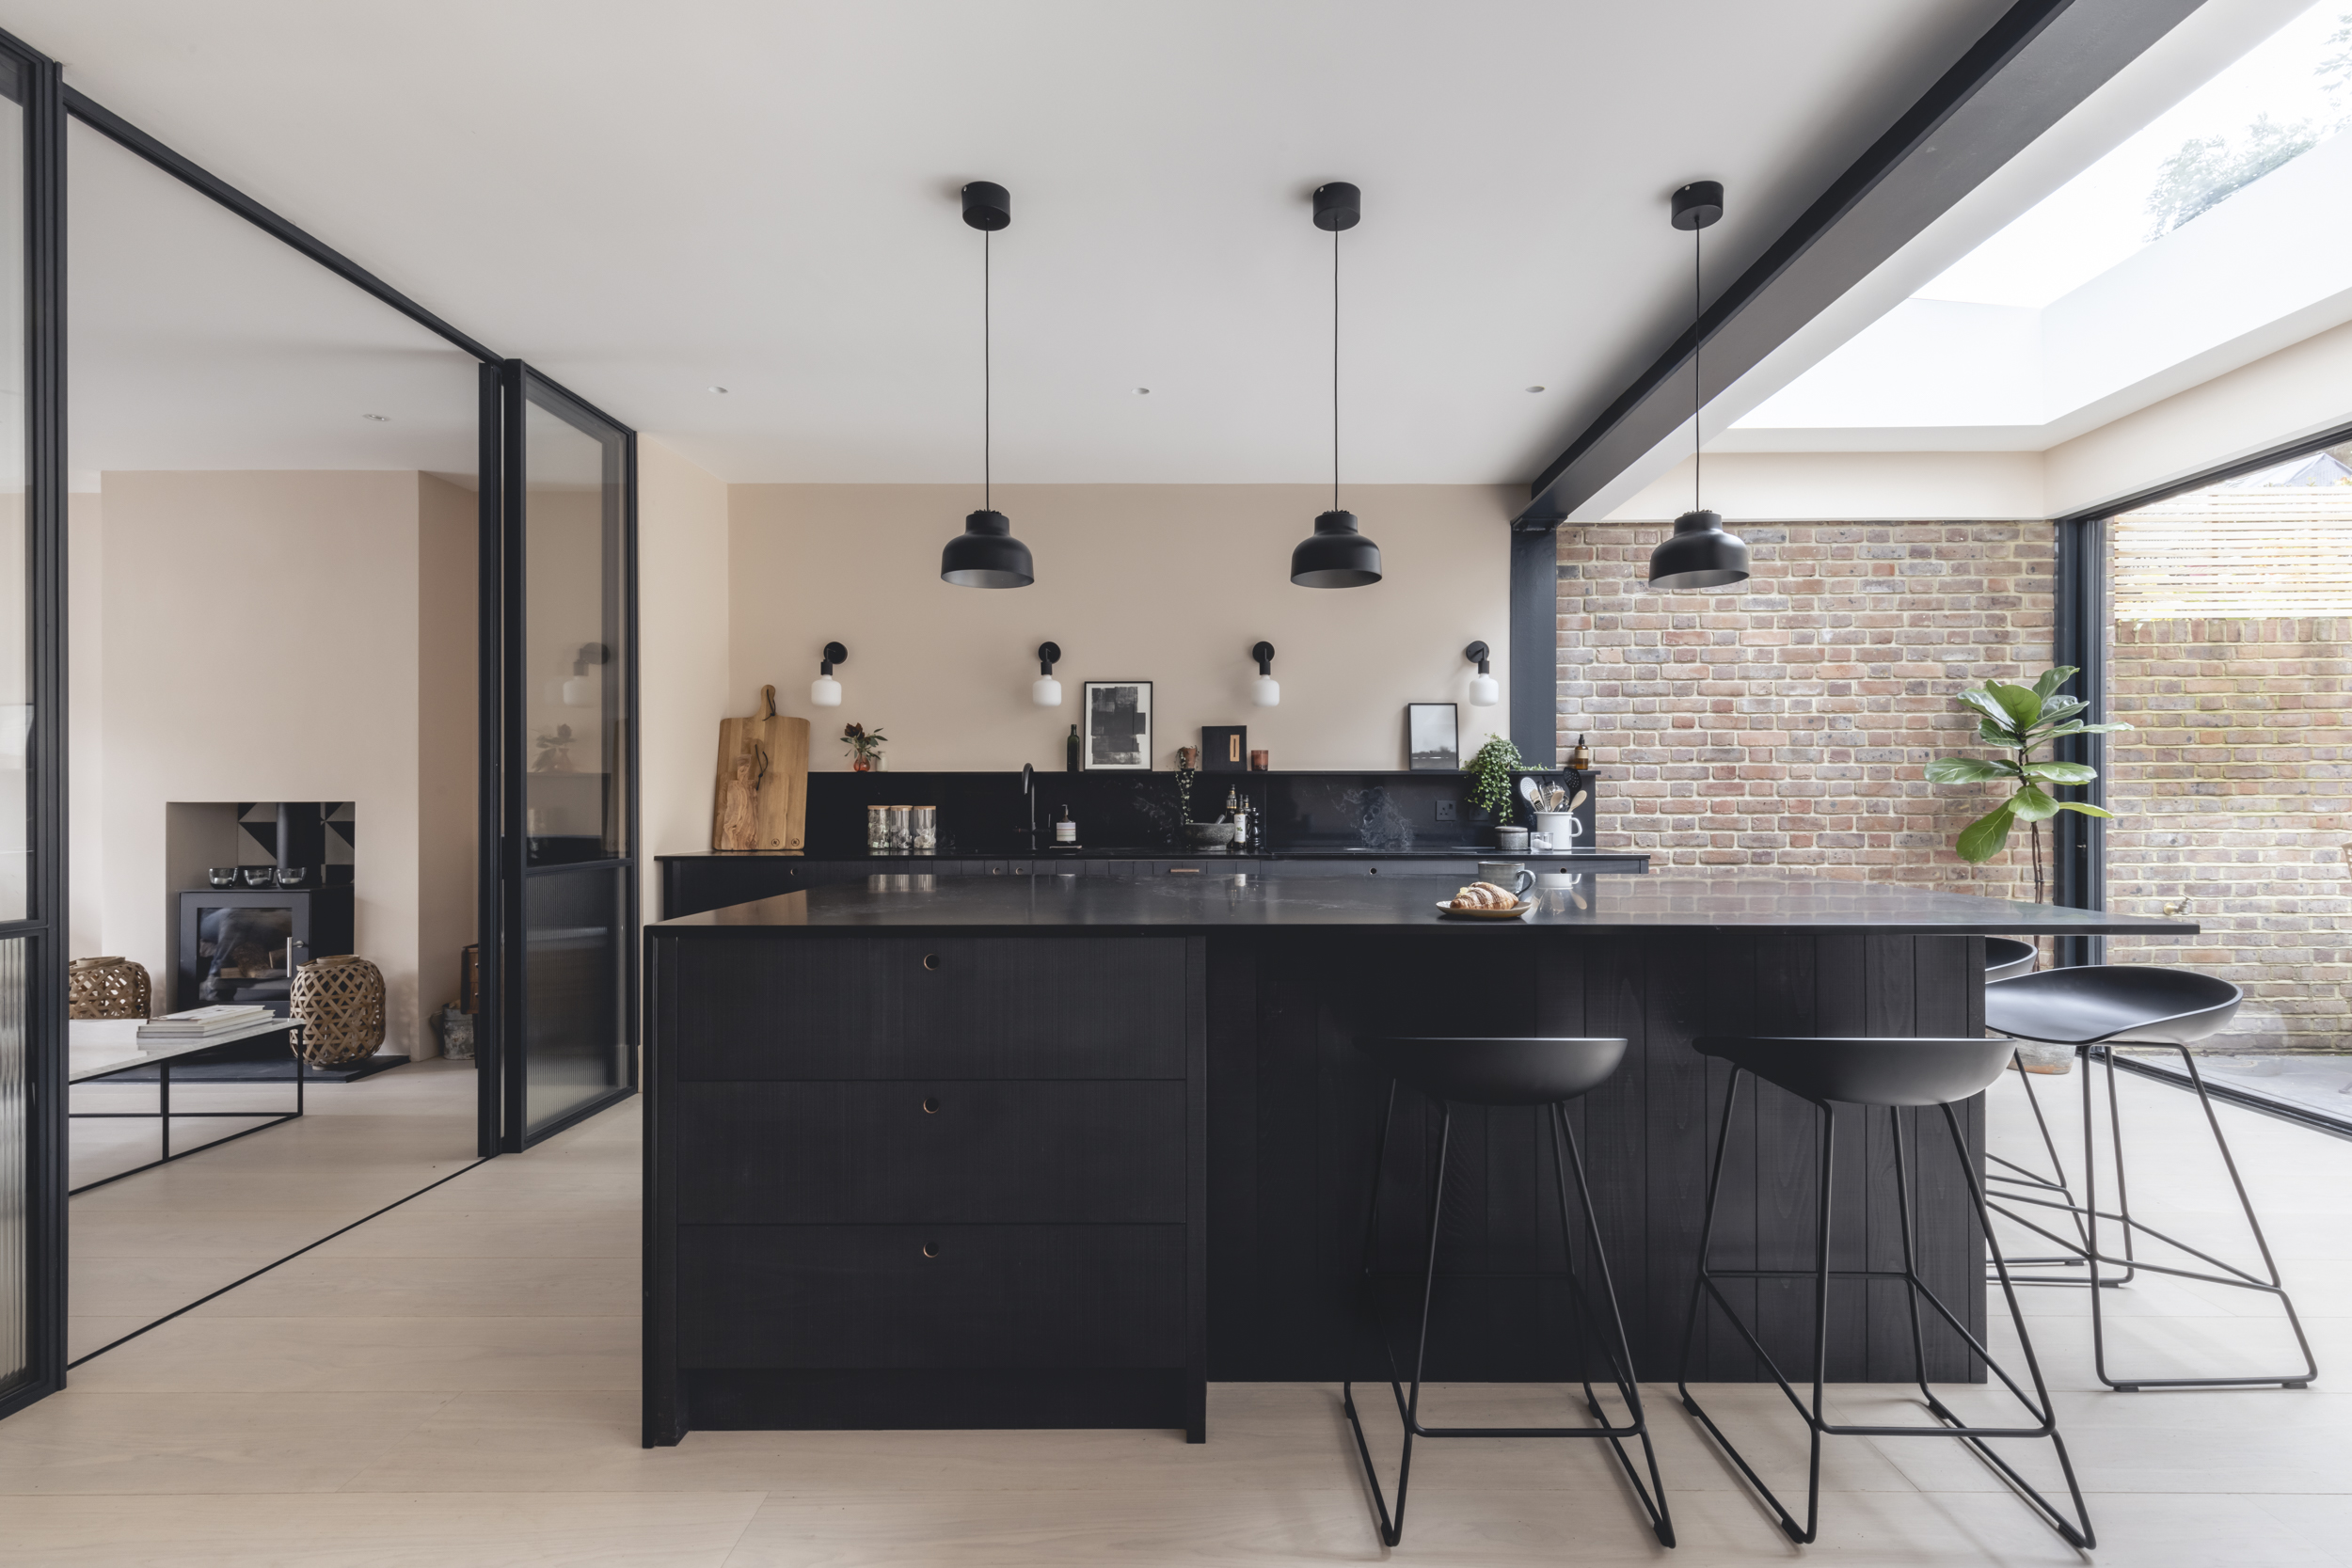 </p> <p>Find your ideal home design pro on designfor-me.com - get matched and see who's interested in your home project. Click image to see more inspiration from our design pros</p> <p>Design by Sooyeon, Interior designer from Kingston upon Thames, London</p> <p> #interiordesign #interiors #homedecor #homeinspiration #Japandihome #Japandidecor #Scandinaviandesign #JapandiKitchen</p> <p>